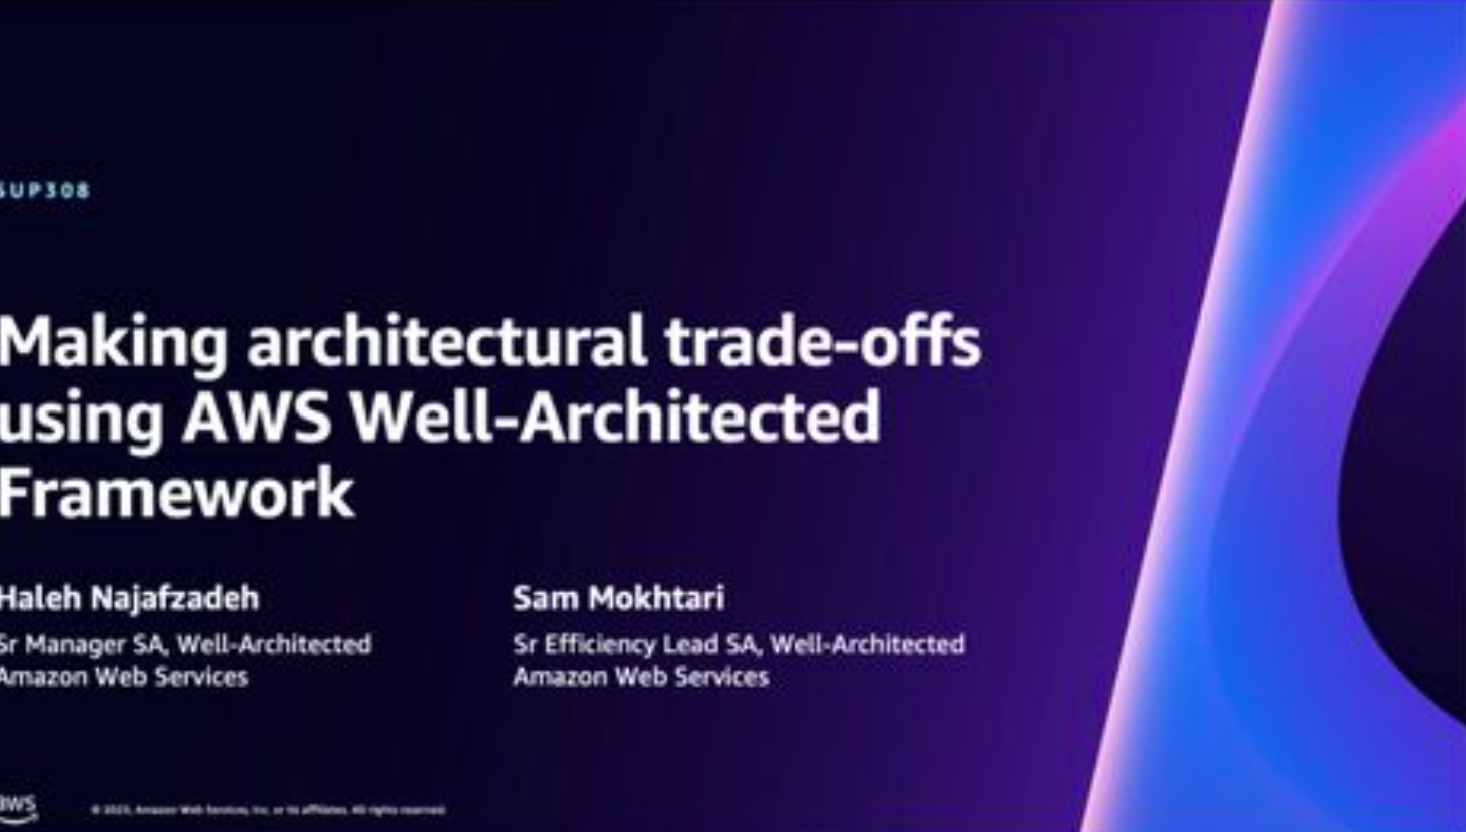 Making architectural trade-offs using AWS Well-Architected Framework